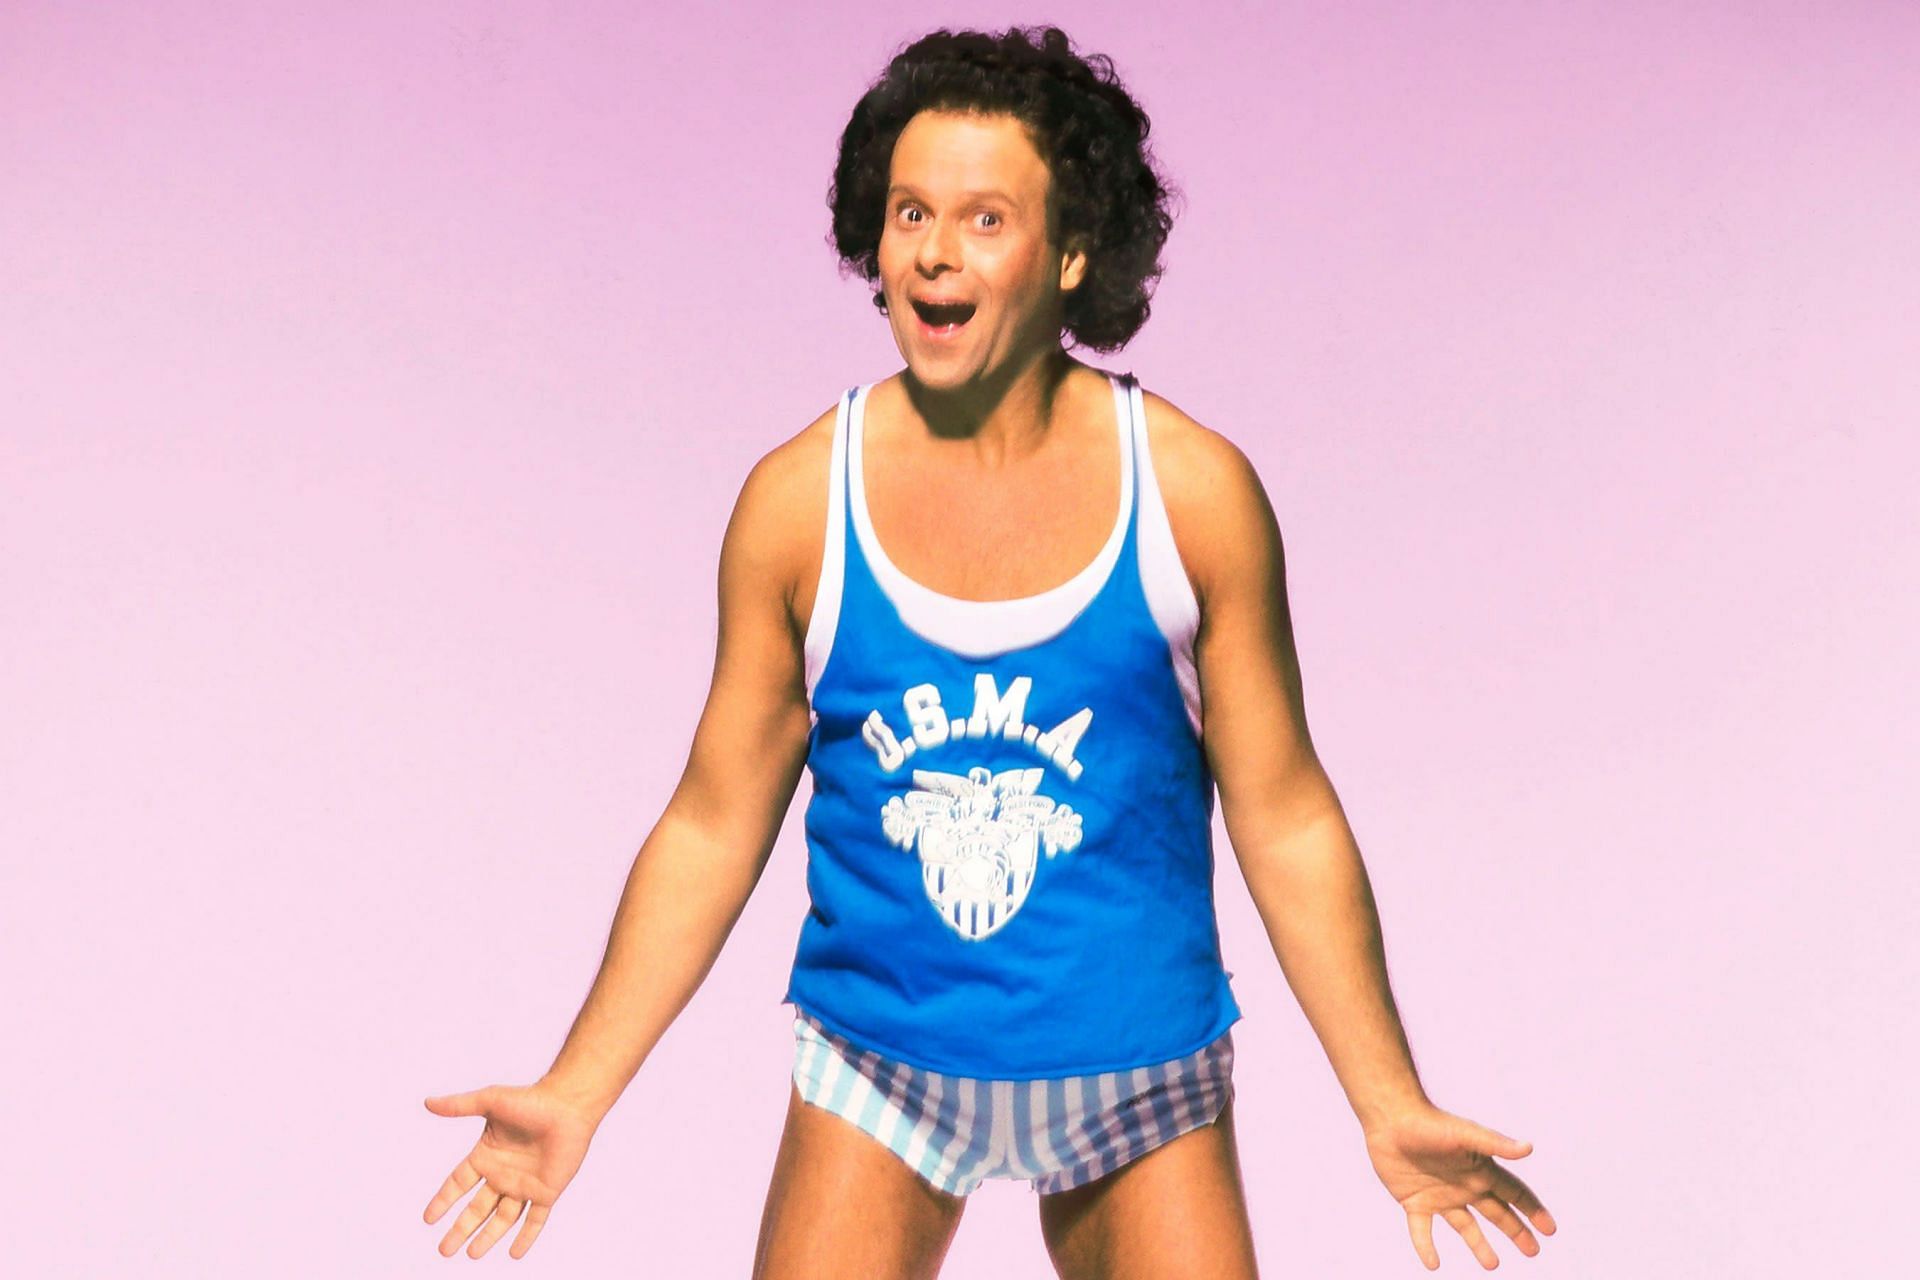 A featurelength Richard Simmons biopic starring Pauly Shore is under